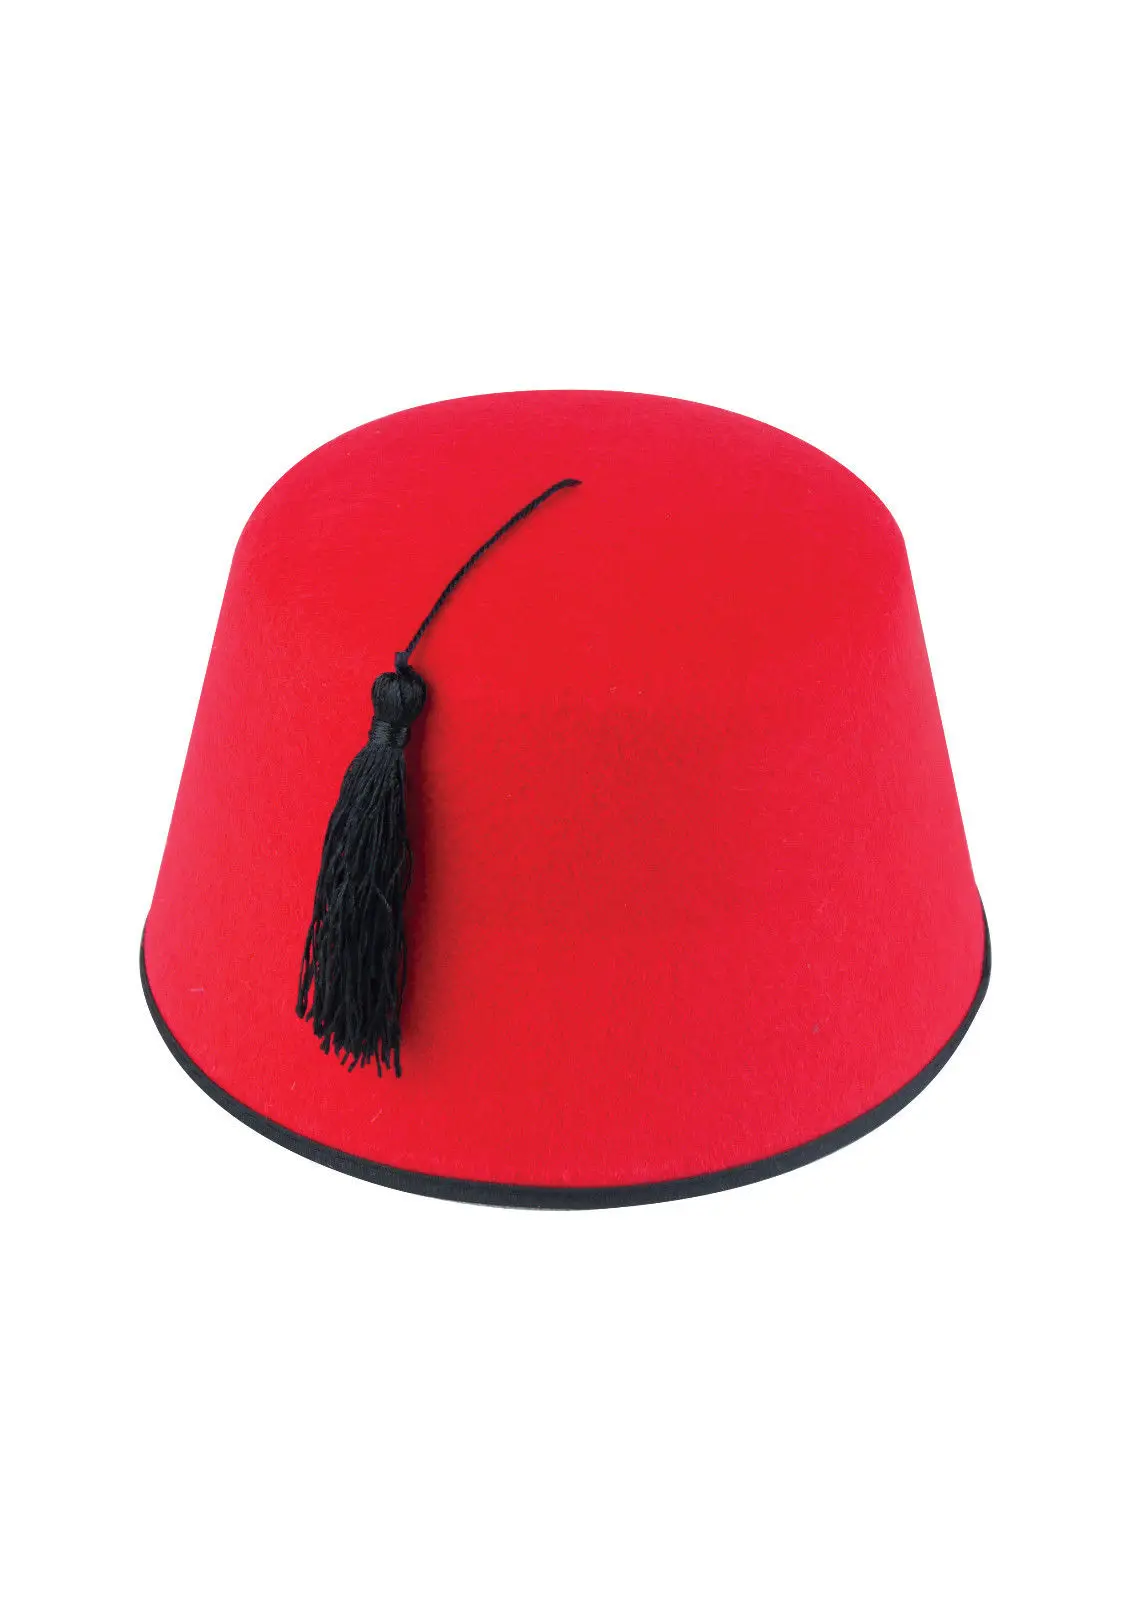 12 X Adults Red Fez Hat Tommy Cooper Moroccan Turkish Fancy Dress Up Party Bulk 